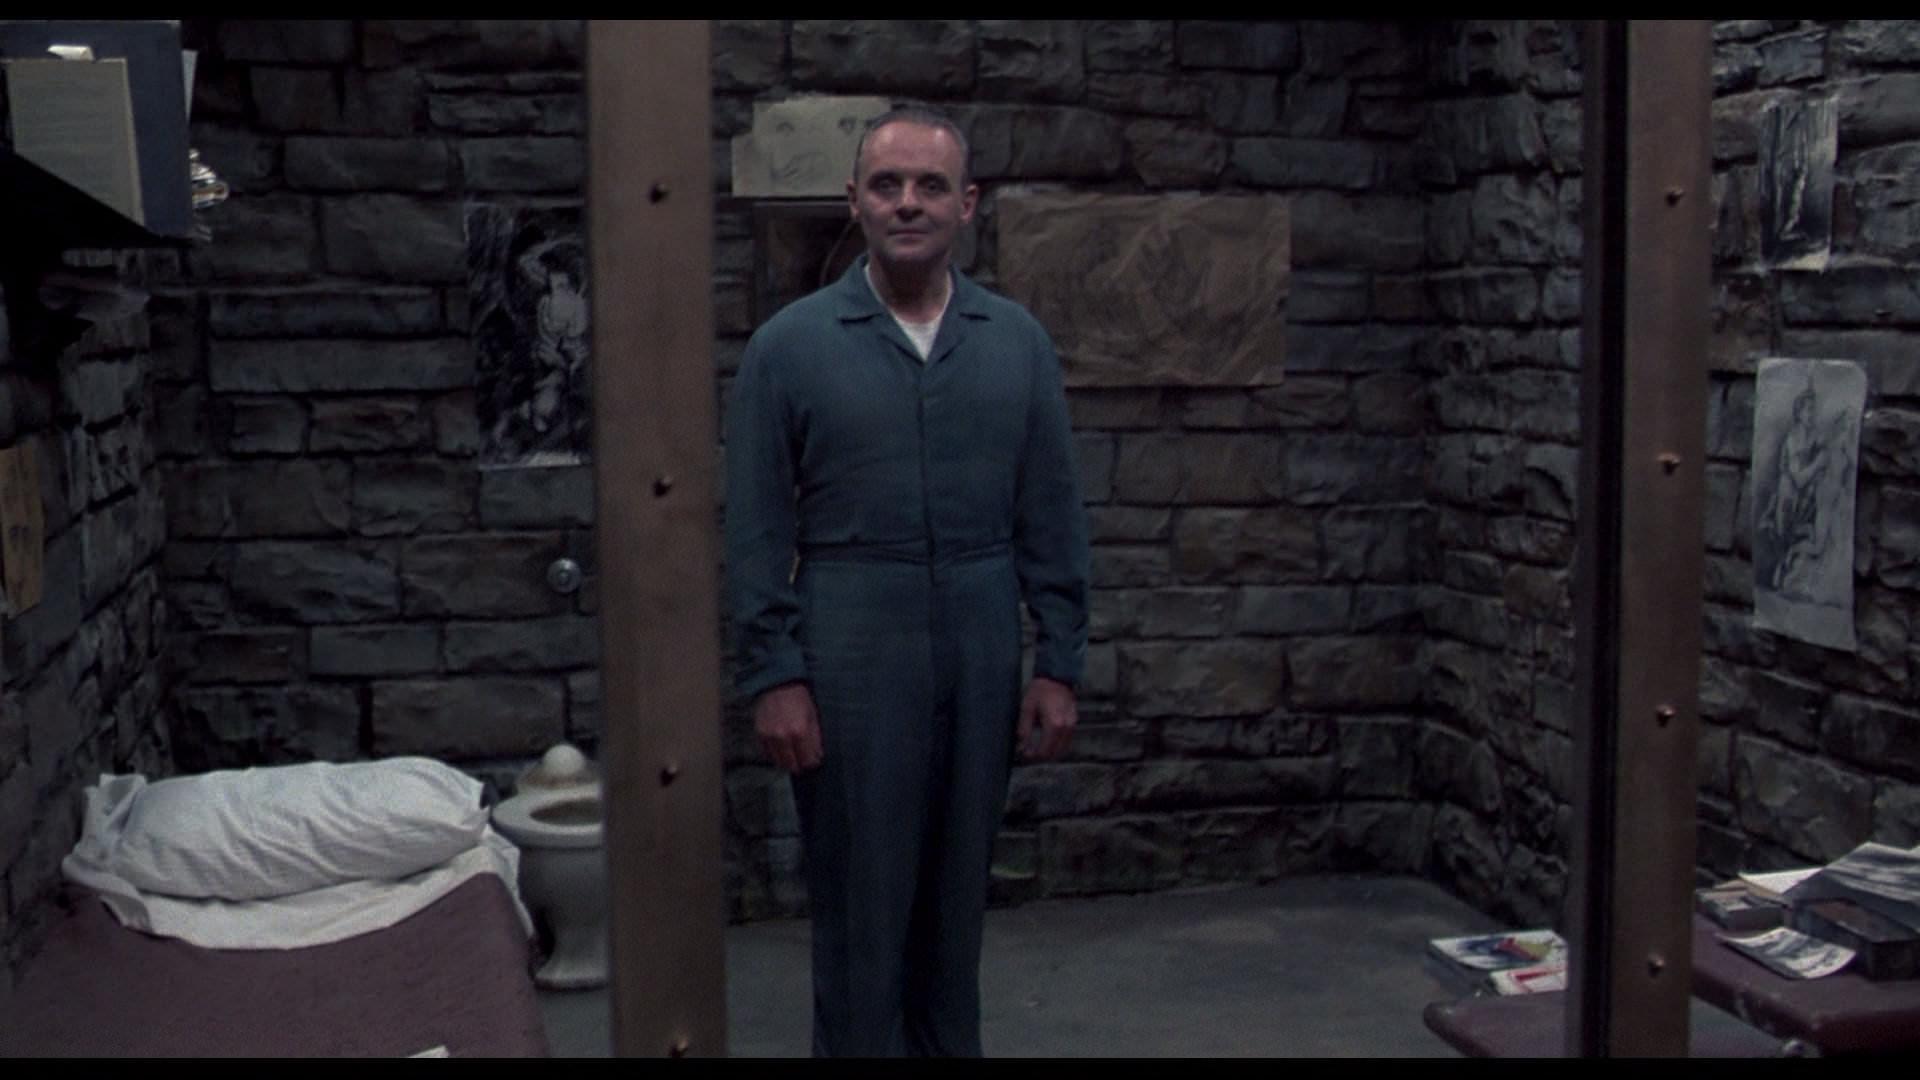 The Silence Of The Lambs wallpaper 1920x1080 Full HD 1080p